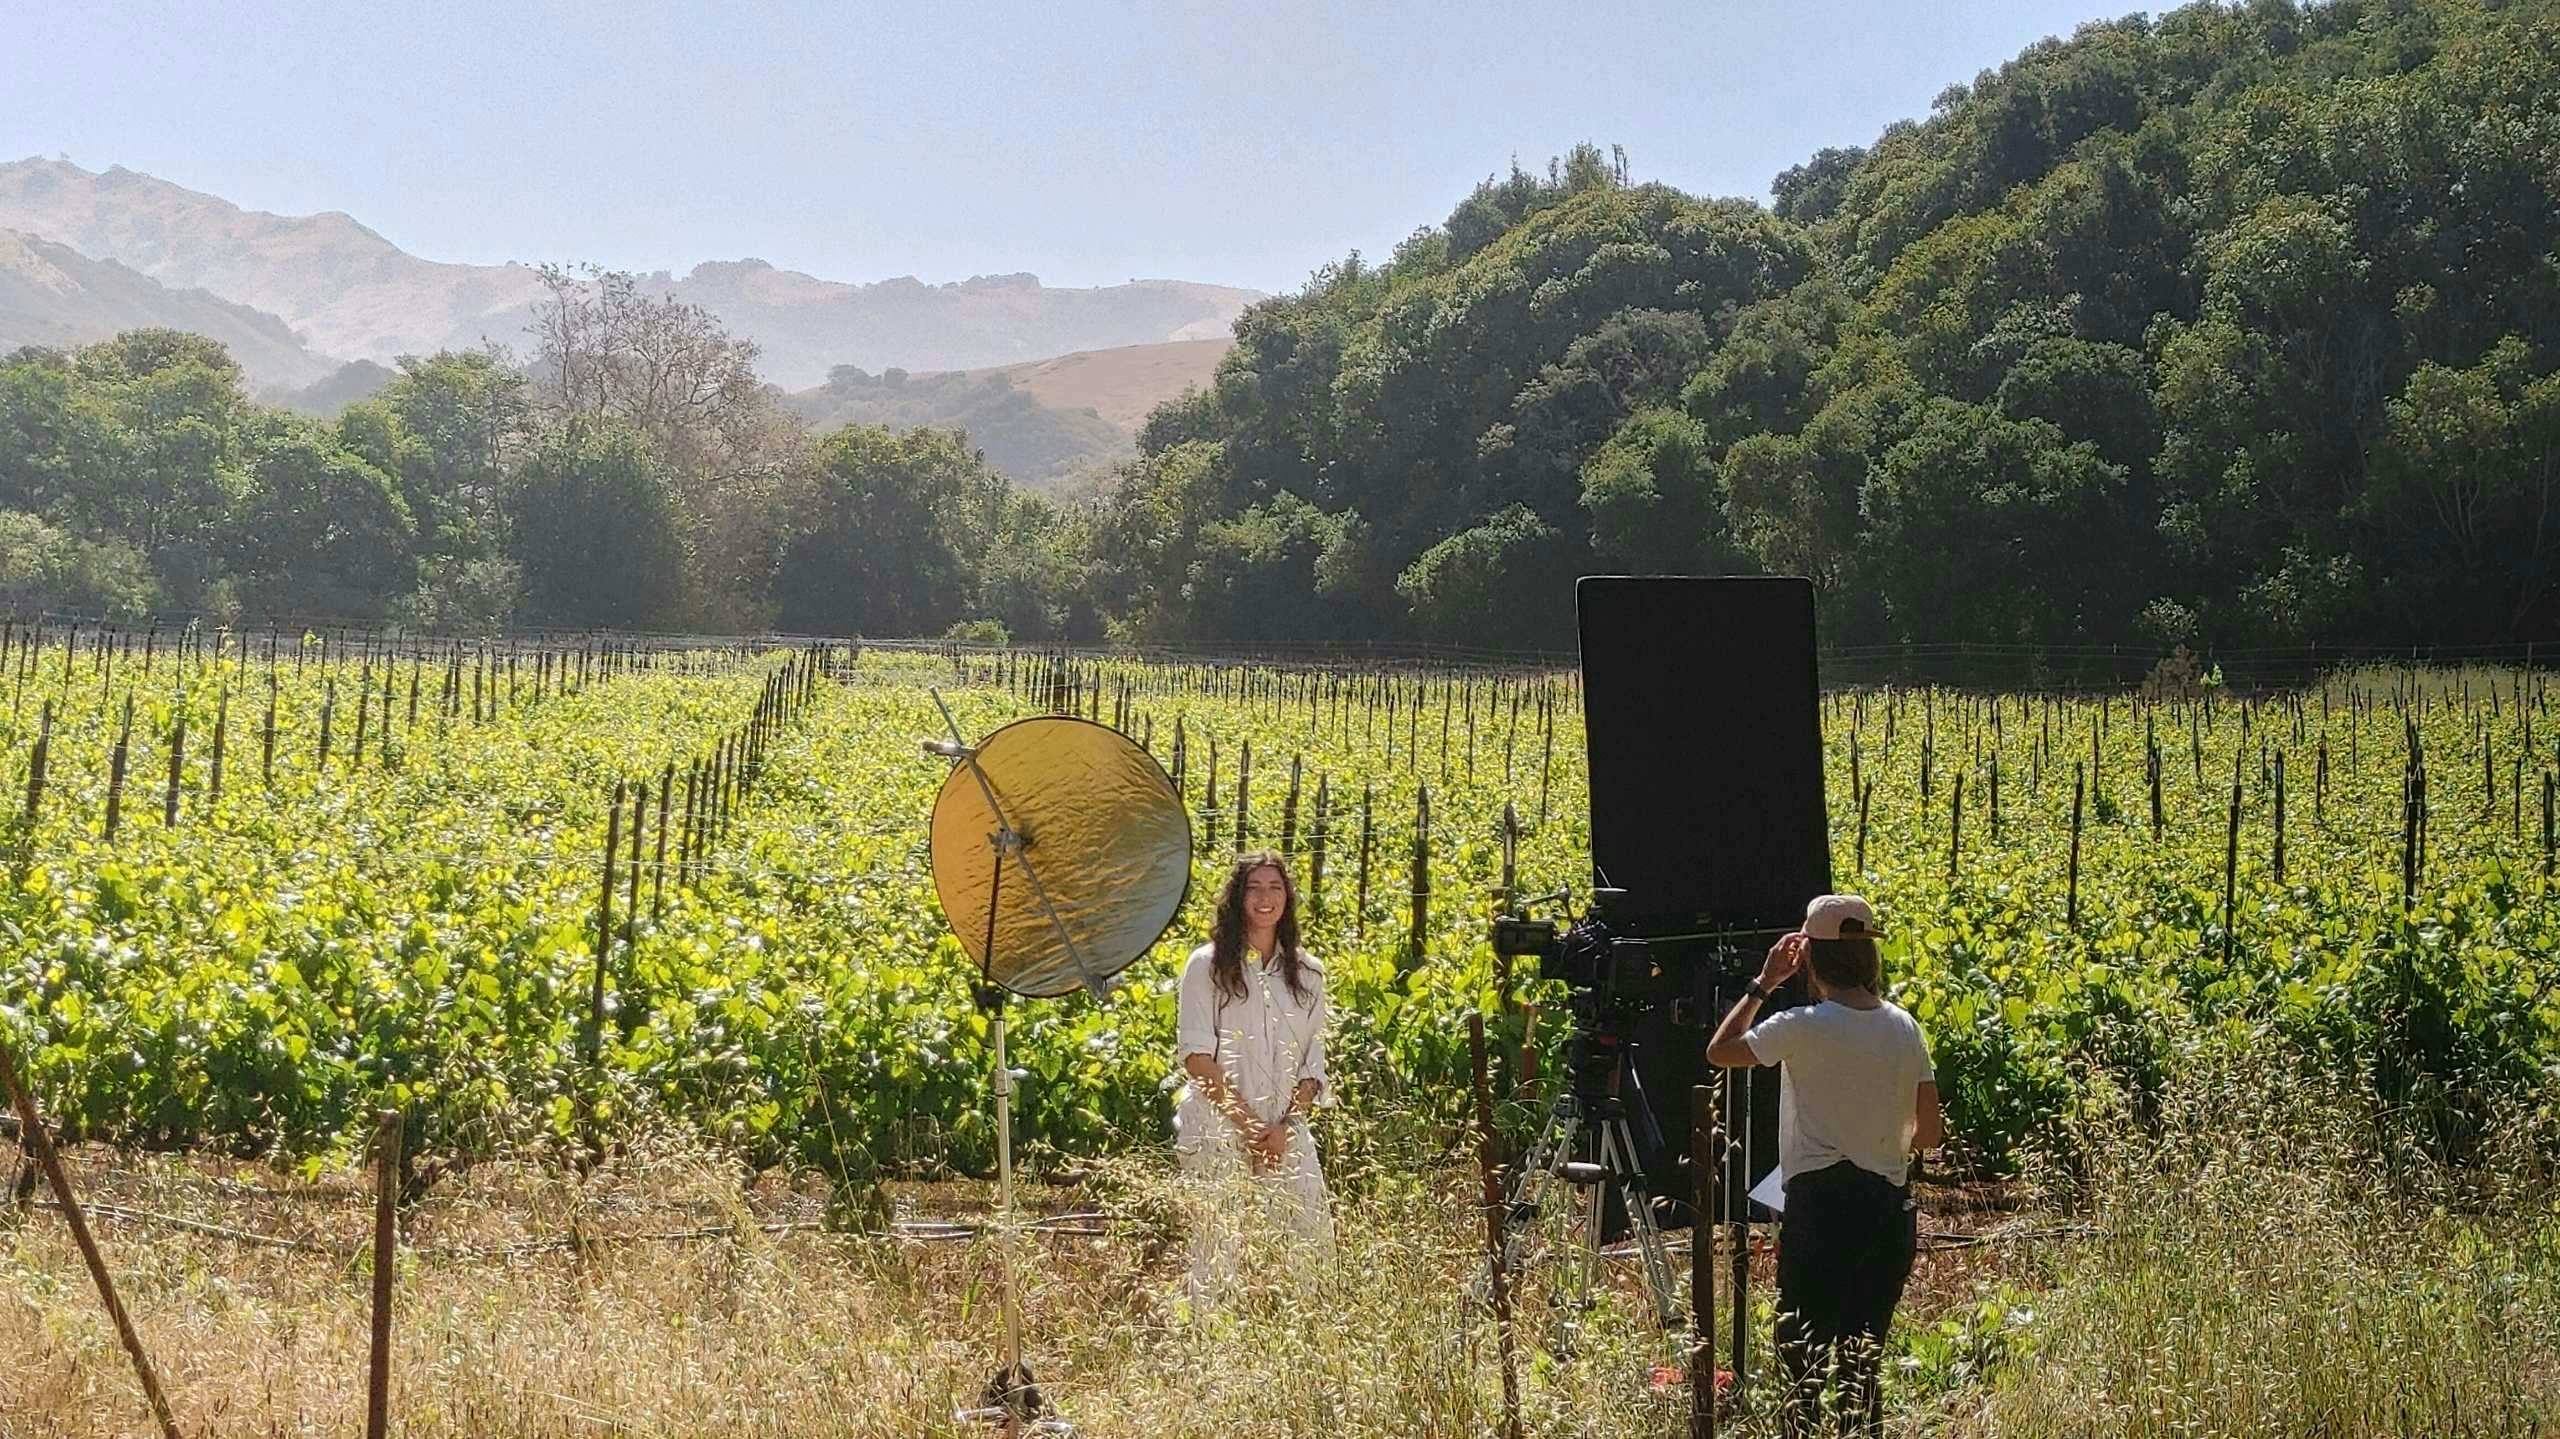 @Bruxa & @Cowtools on Phelan Farm in front of the Pinot Noir vines, shooting a little doc + TT trailer with Rajat Parr in Central Coast, CA.